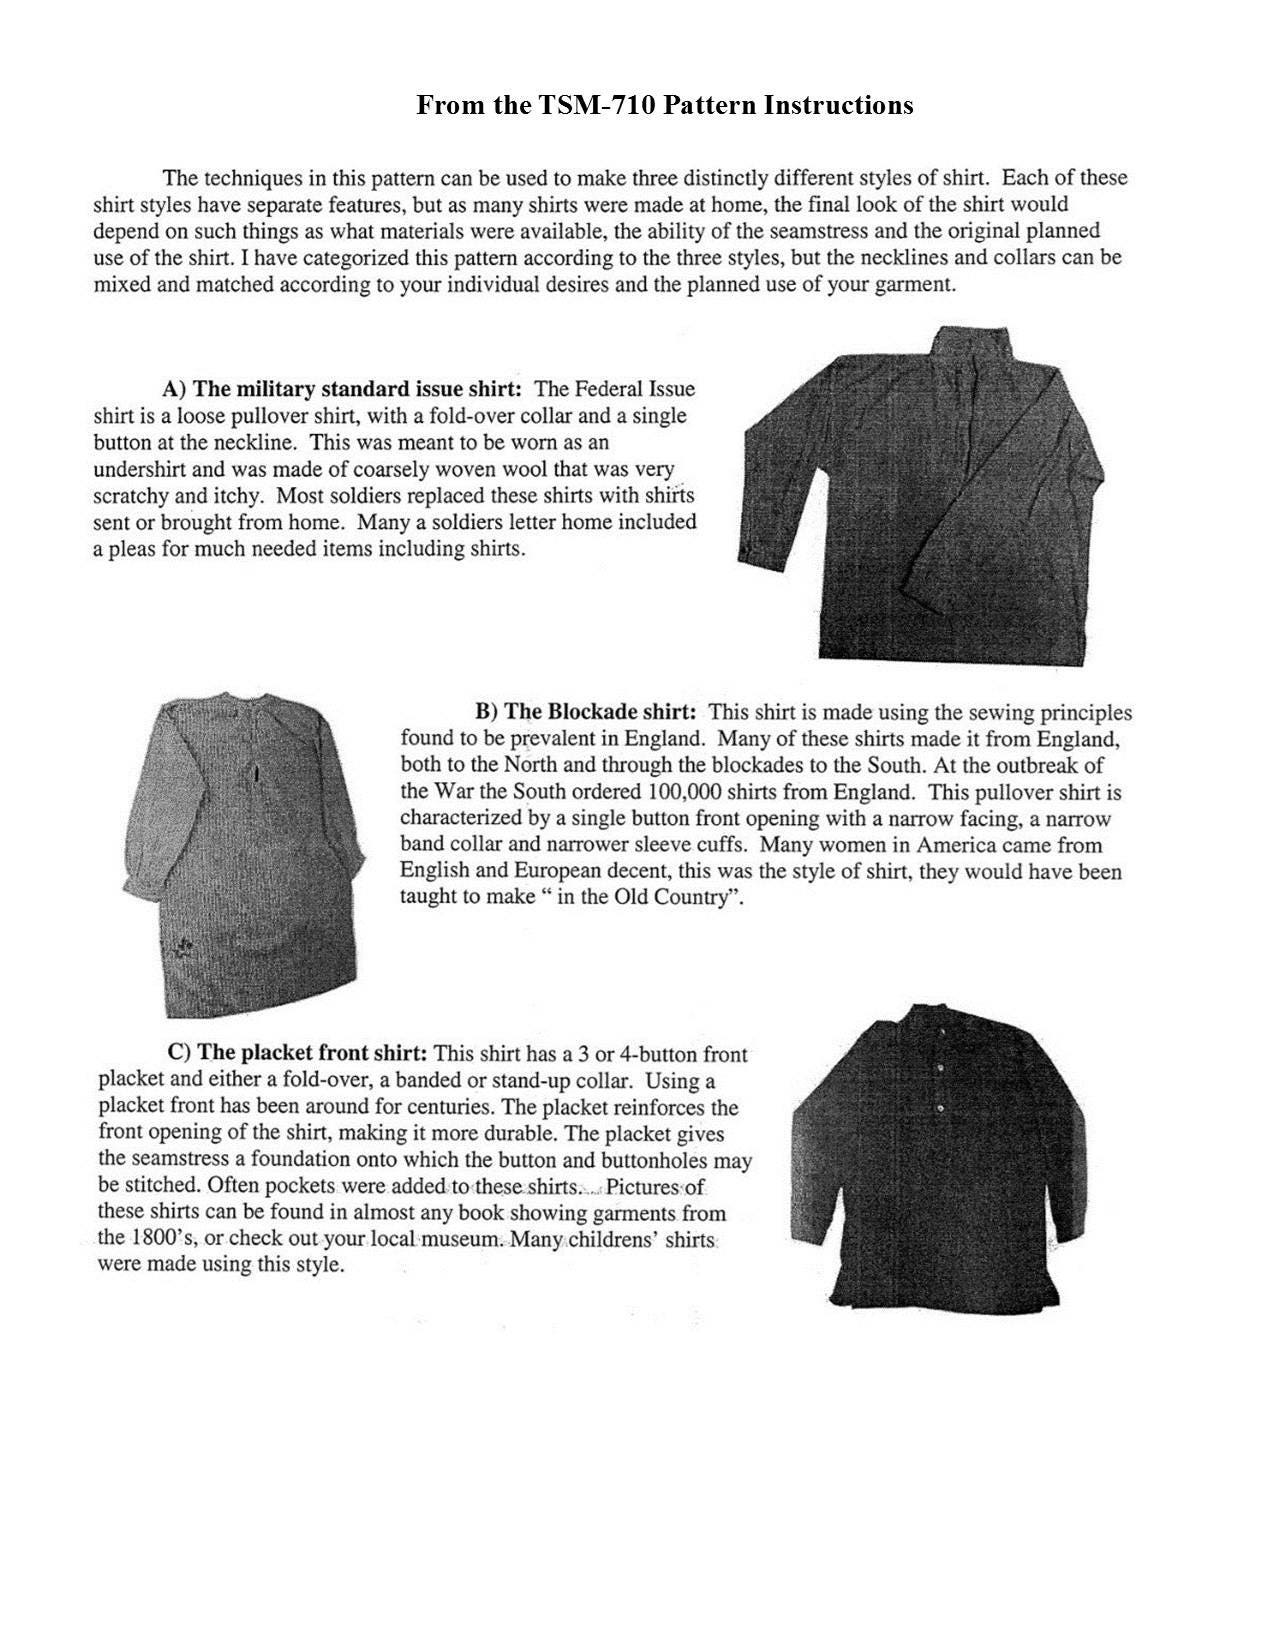 Military Standard Issue/ Mid - 19th Century Basic/ Civilian Mens and Boys Shirt Pattern Timeless Stitches Sewing Pattern TSM-710